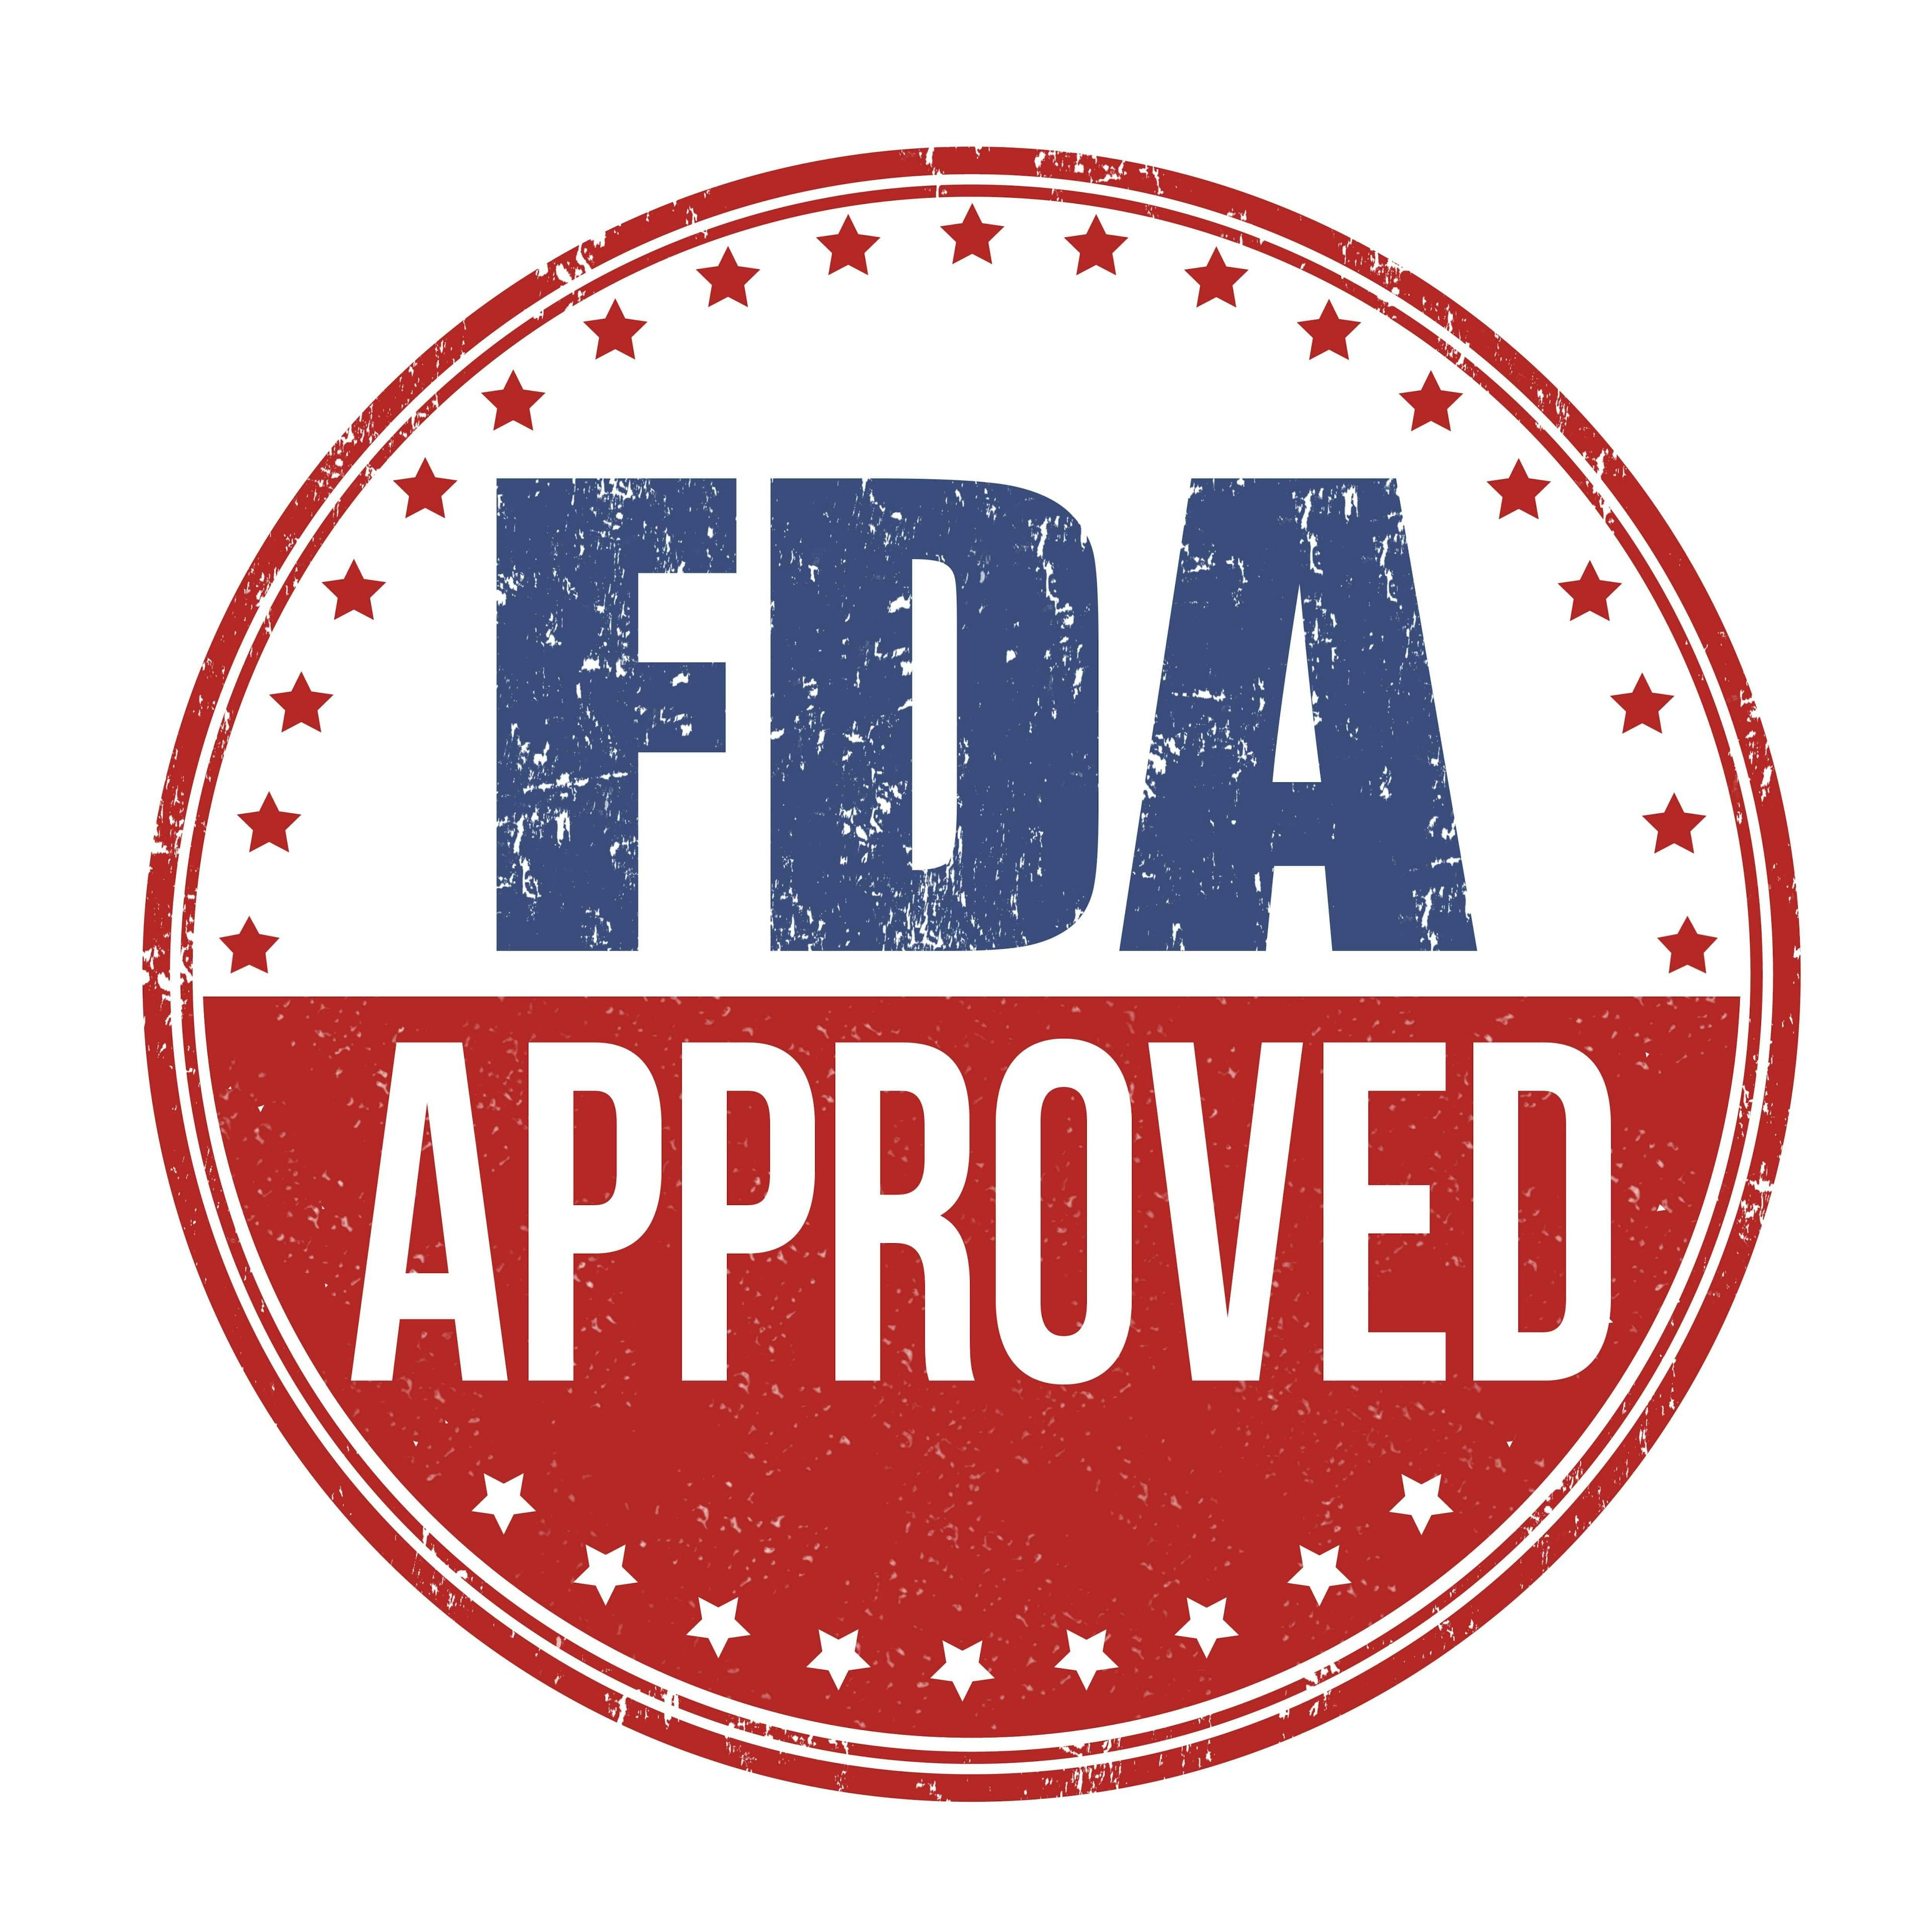 FDA approval text